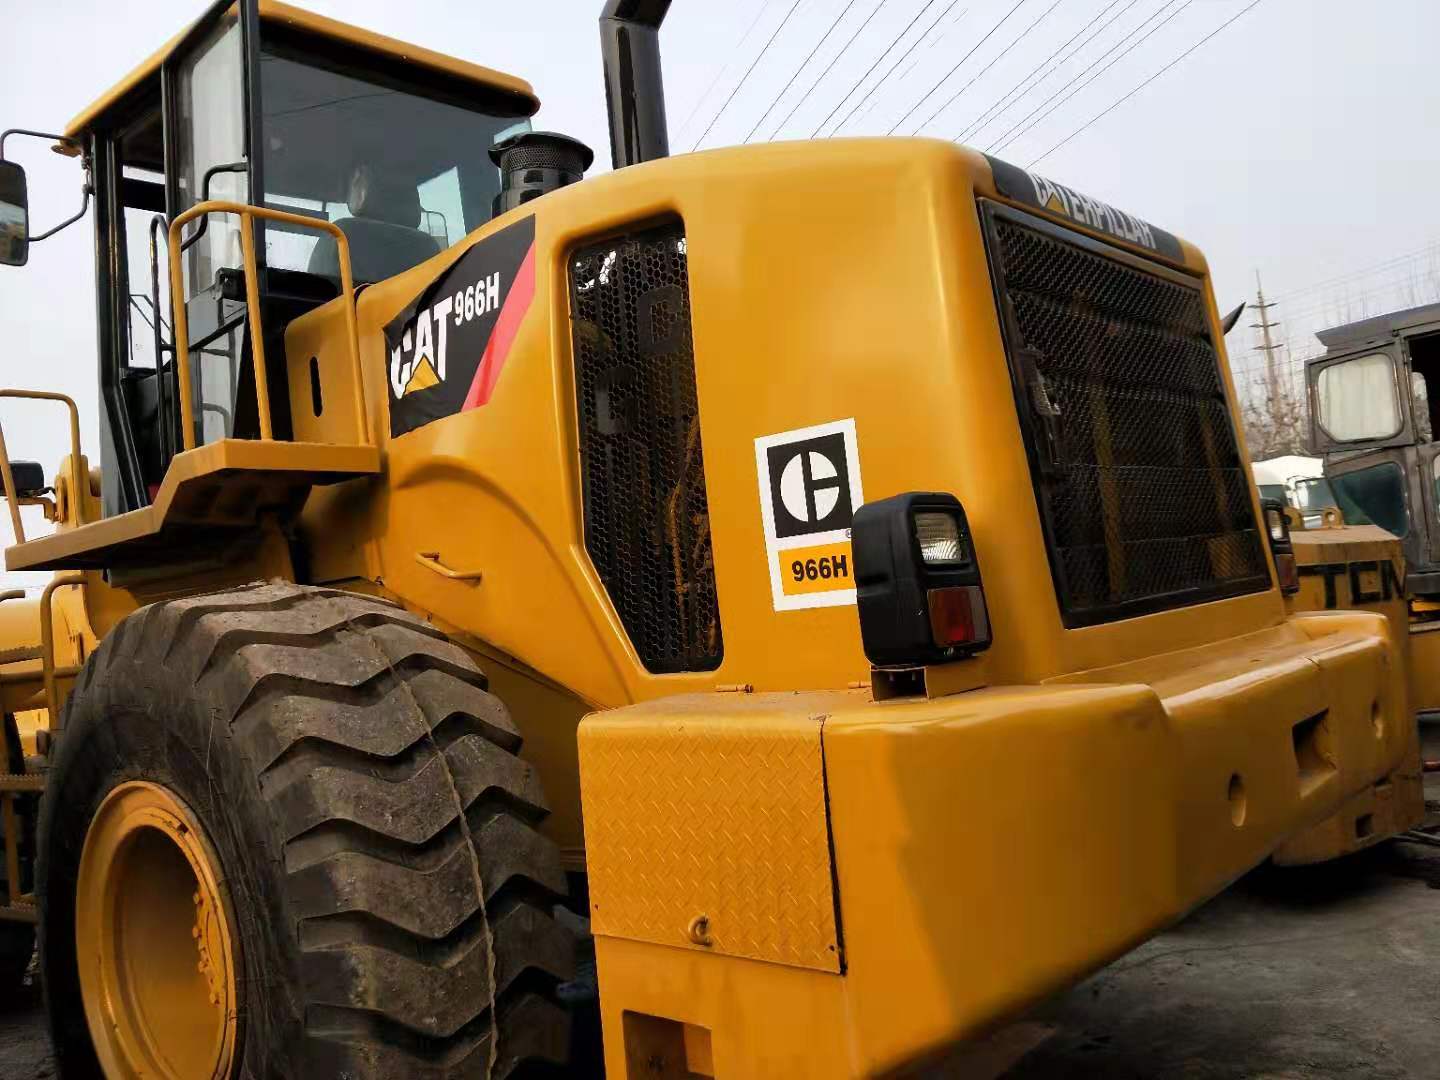 Buy cheap used machinery used /second hand loader caterpillar 966h /966f/ 966g for sale product